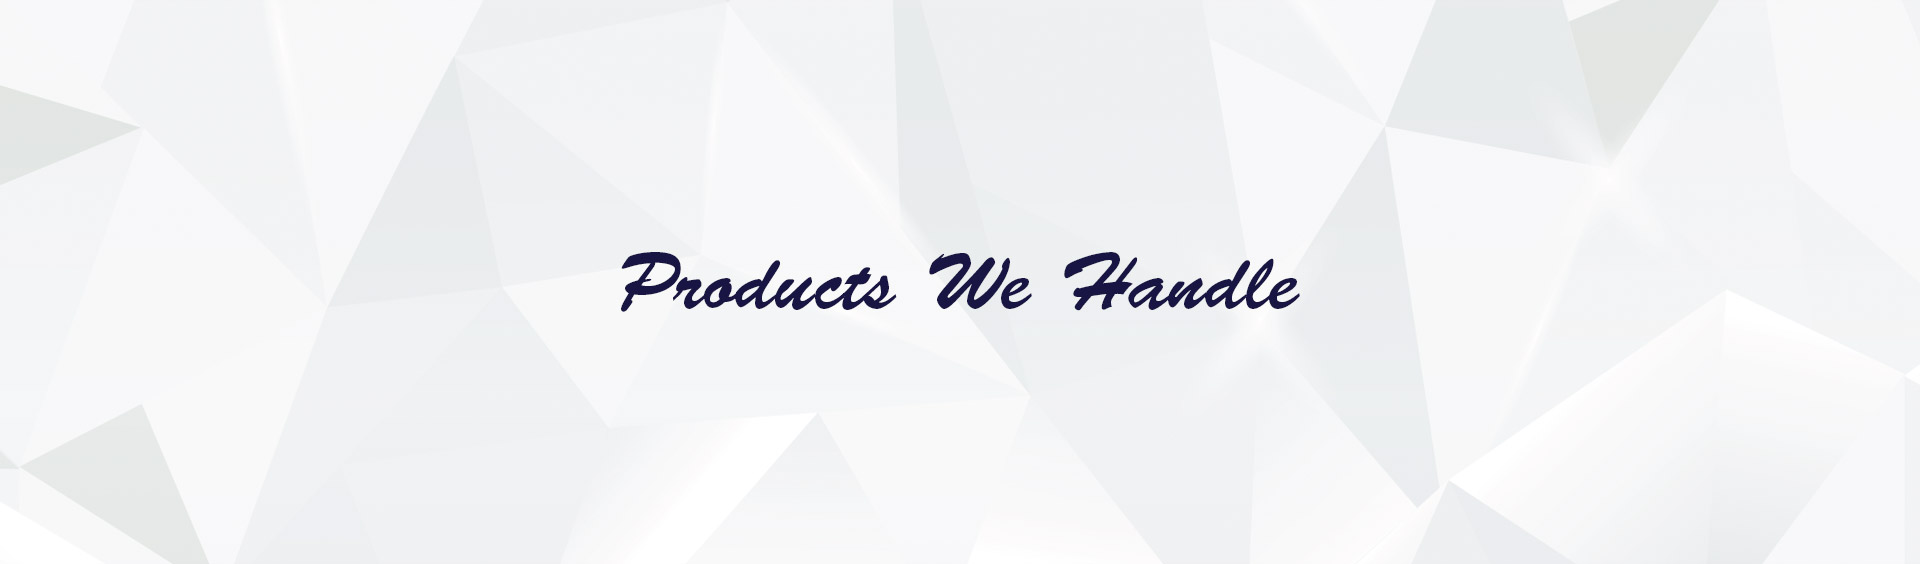 Products we handle